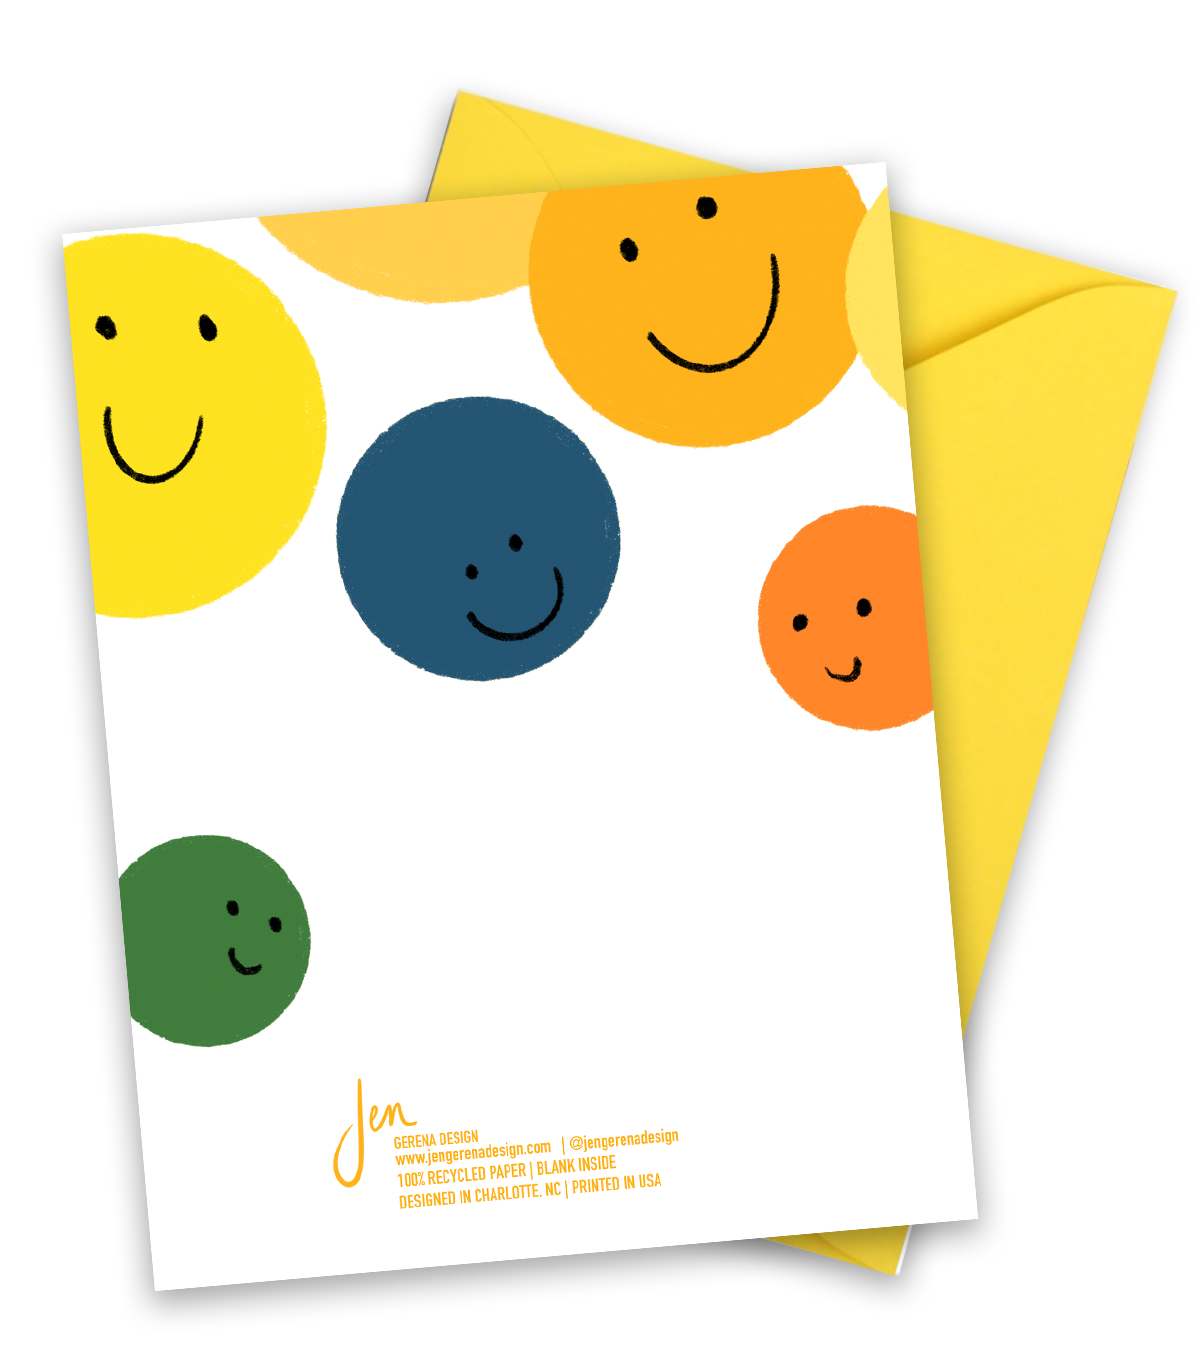 Happy Smile- Blank Card, Card Pack